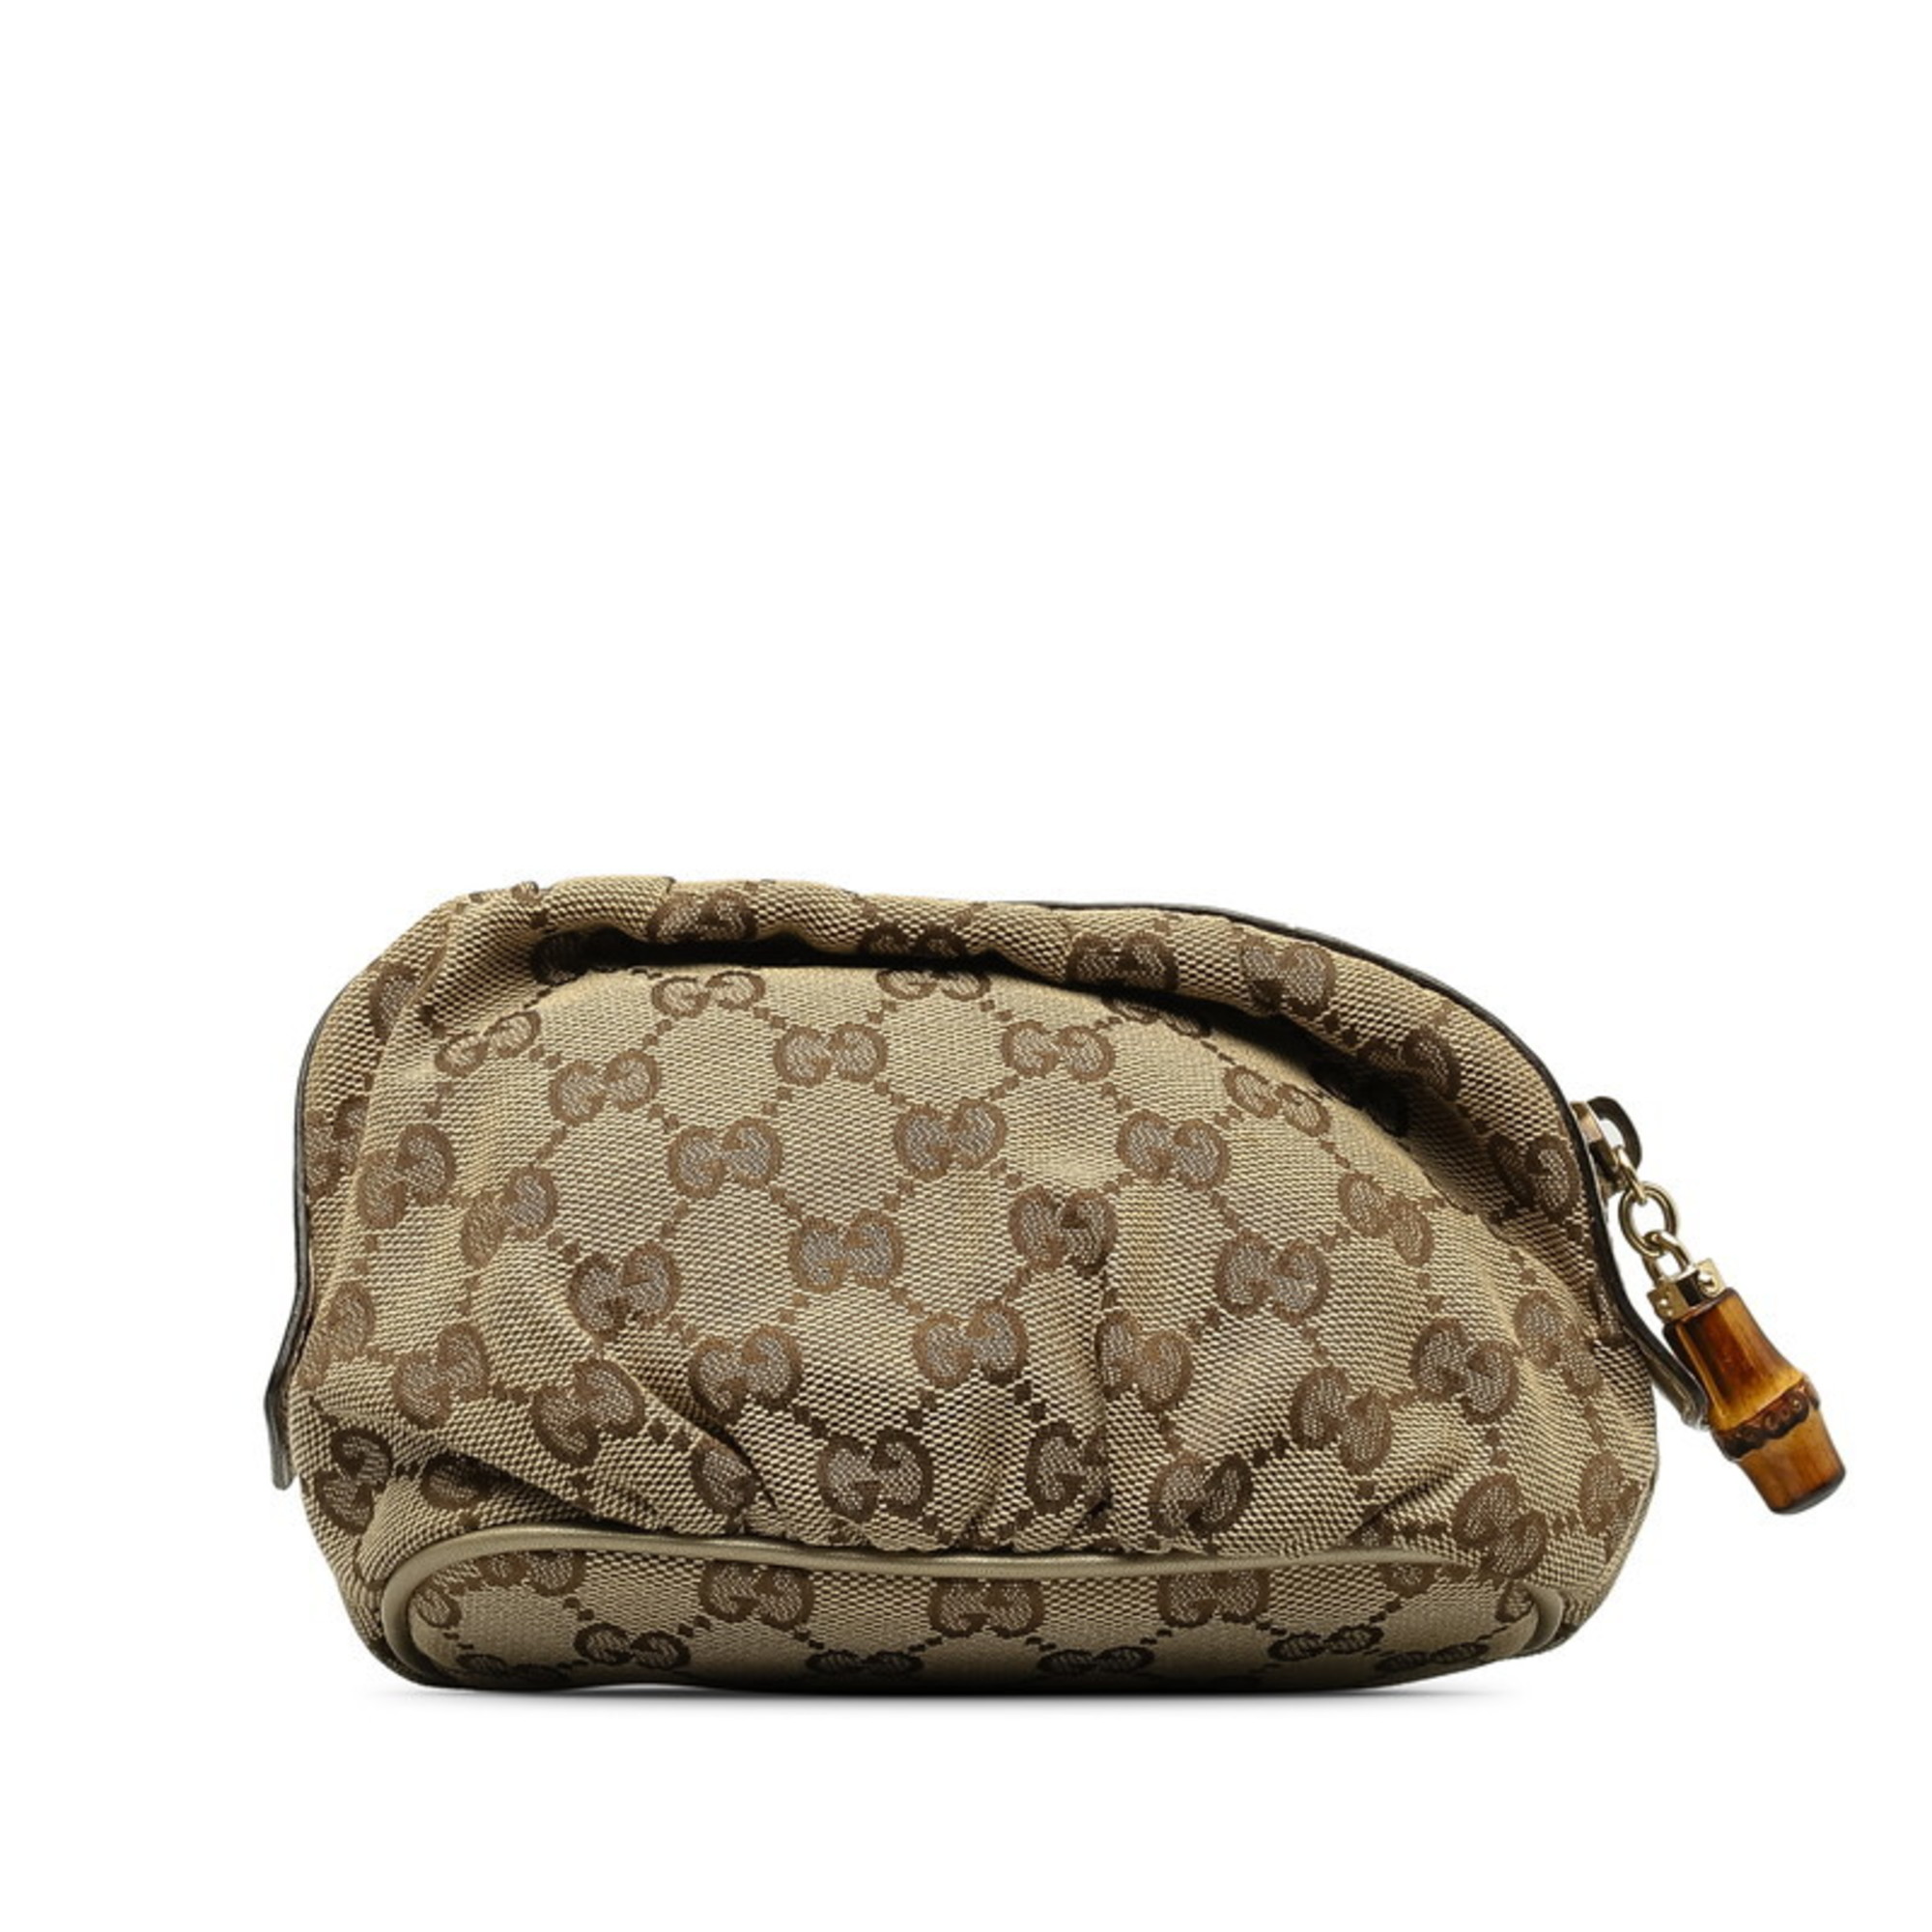 Gucci Bamboo GG Canvas Pouch 246175 Beige Leather Women's GUCCI